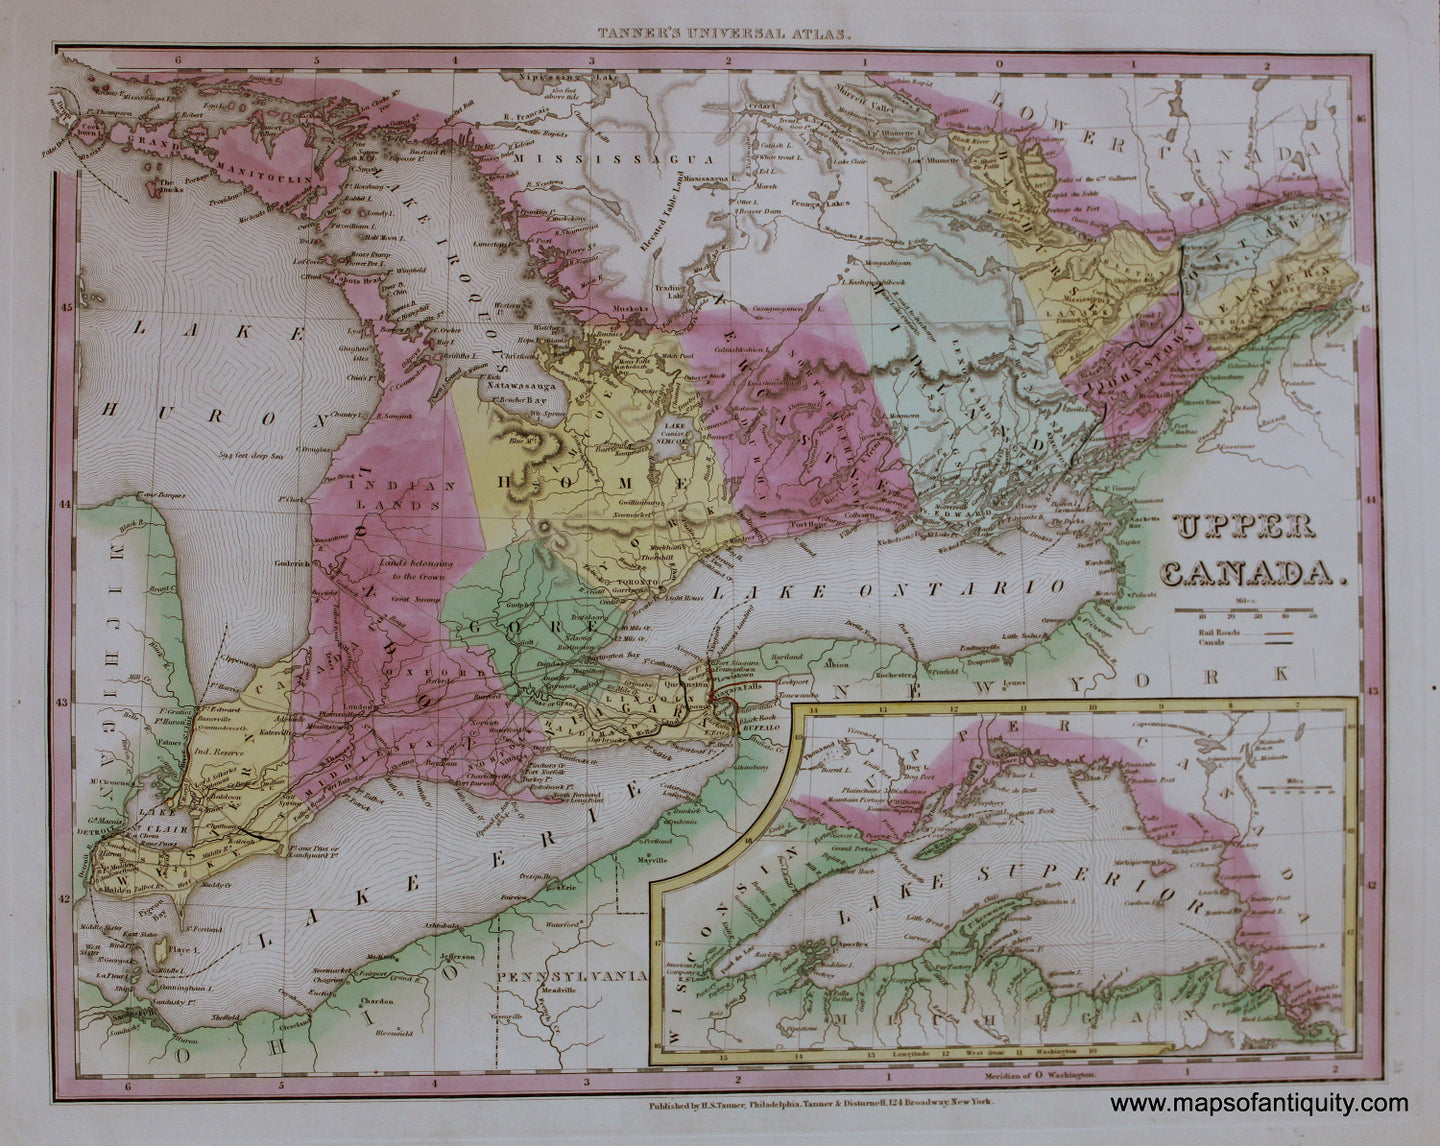 Antique-Hand-Colored-Engraved-Map-Upper-Canada.-North-America-Canada-1841-Tanner-Maps-Of-Antiquity